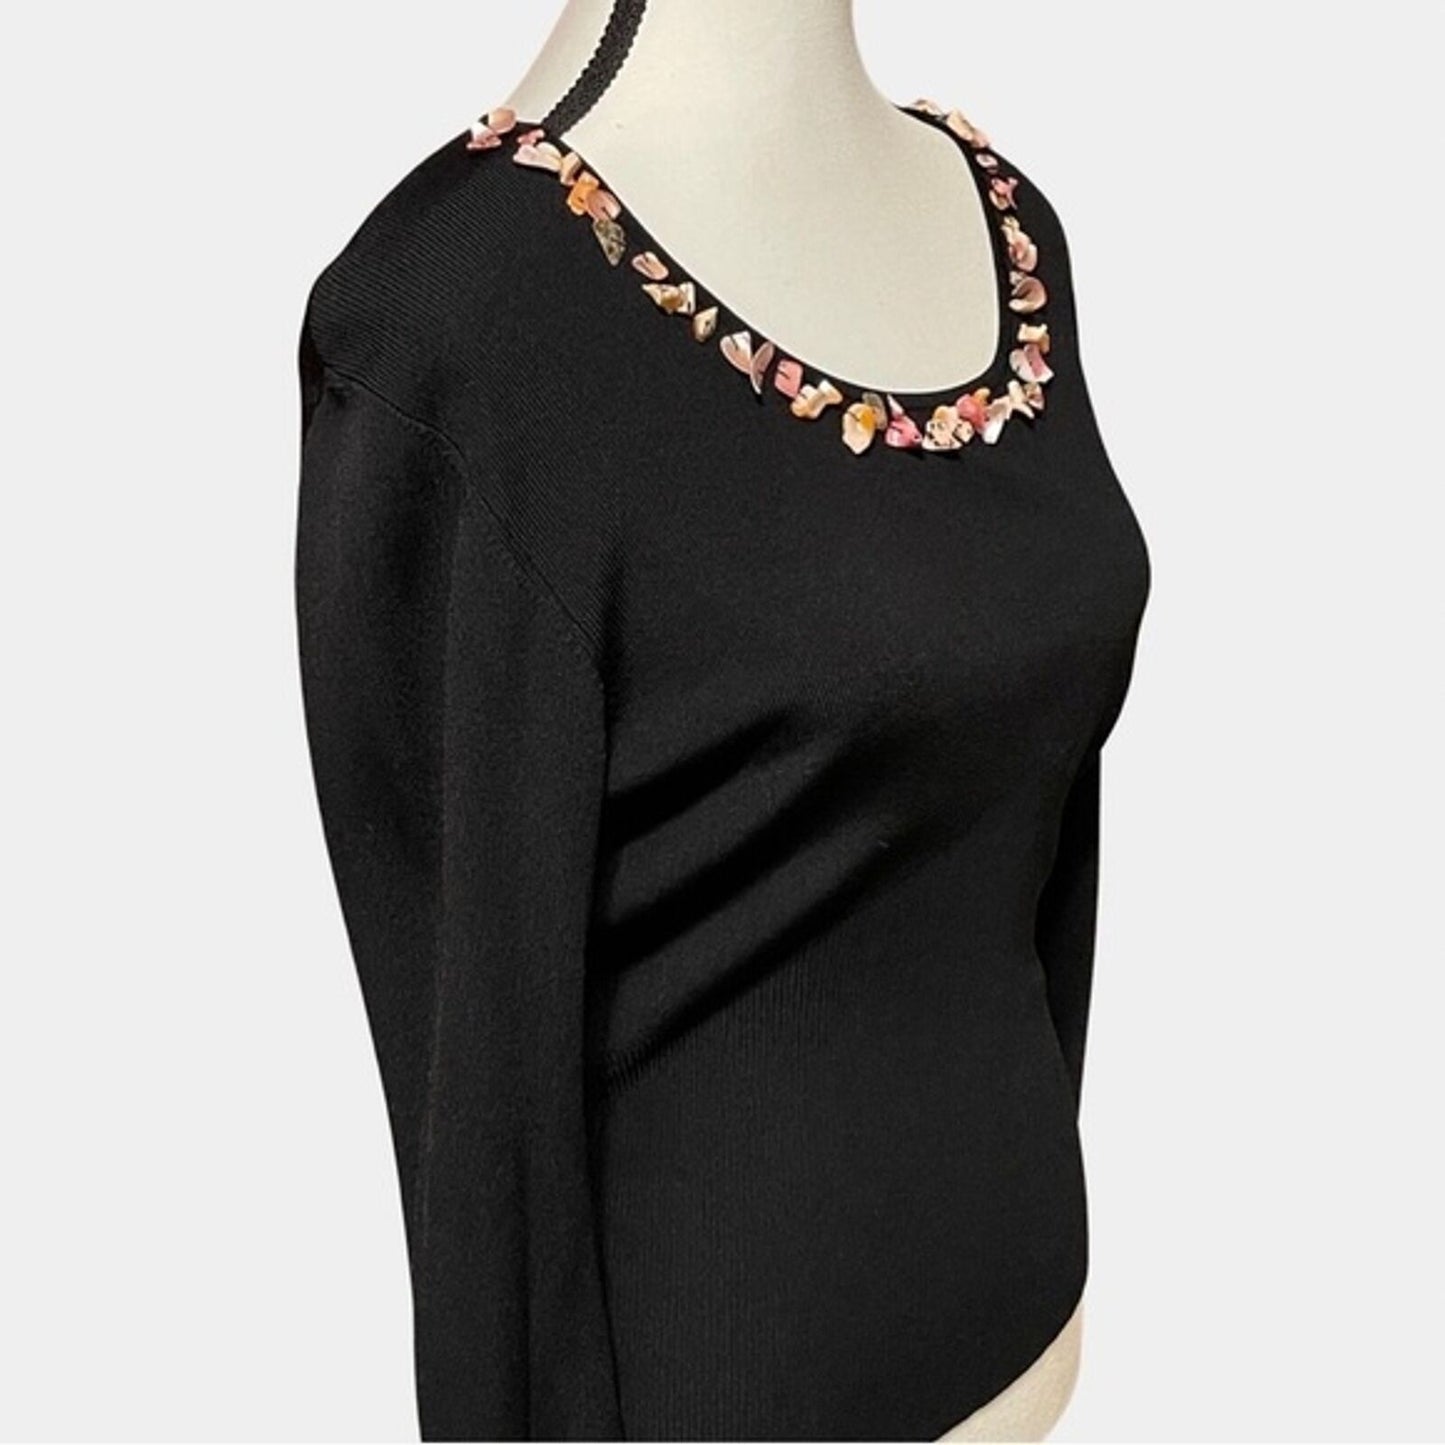 Dolce Cabo Black Sweater with Pink Shell Neckline Size XL